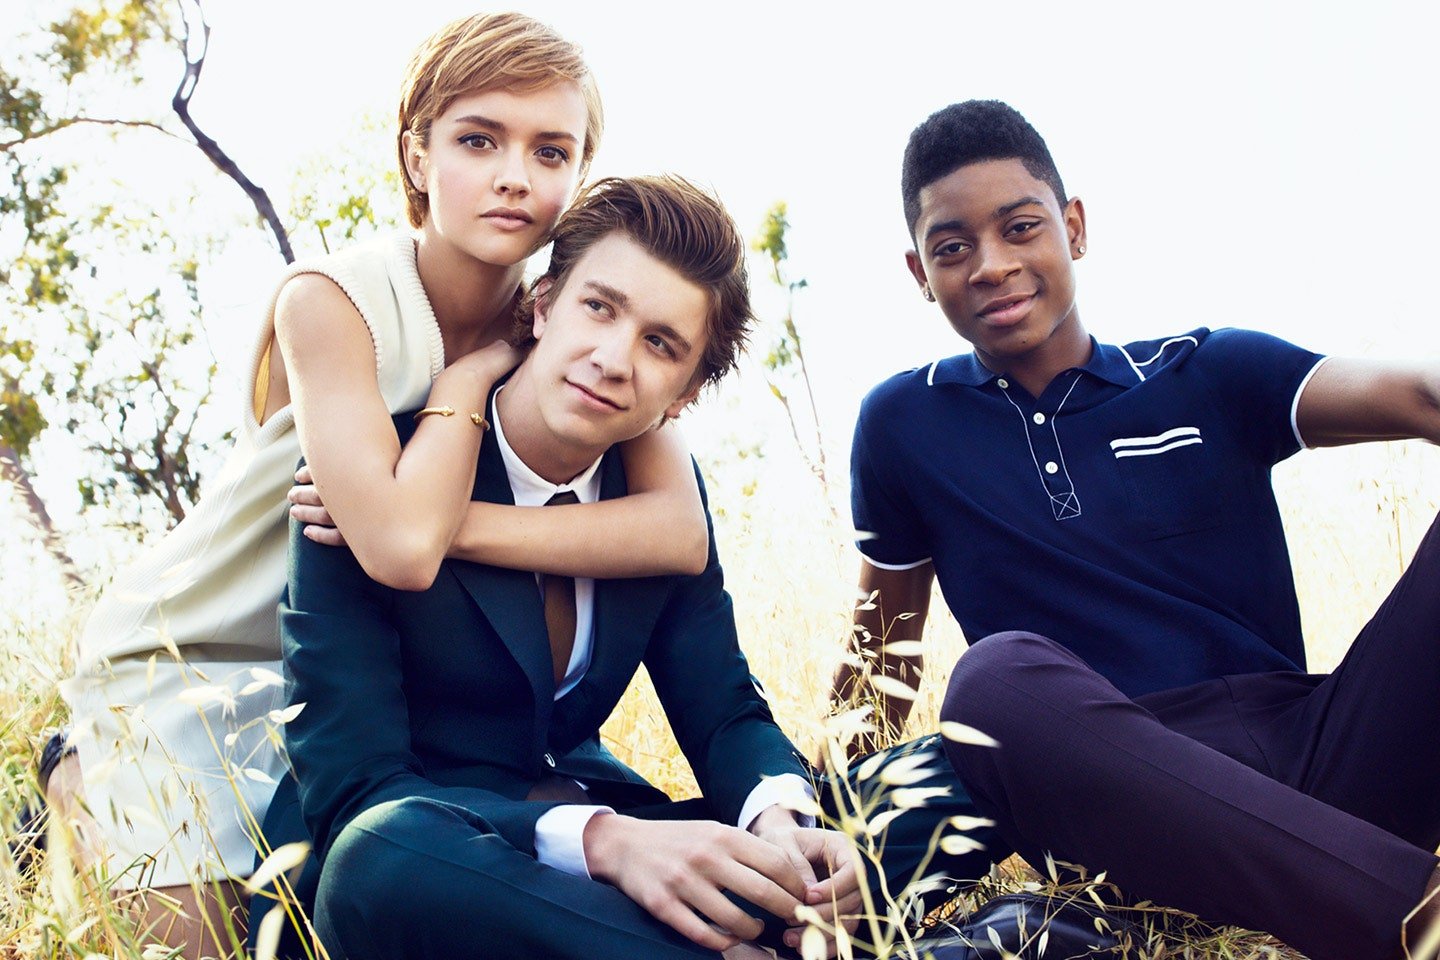 Olivia Cooke, Thomas Mann, and RJ Cyler, The Young Stars of Me Earl and the Dying Girl